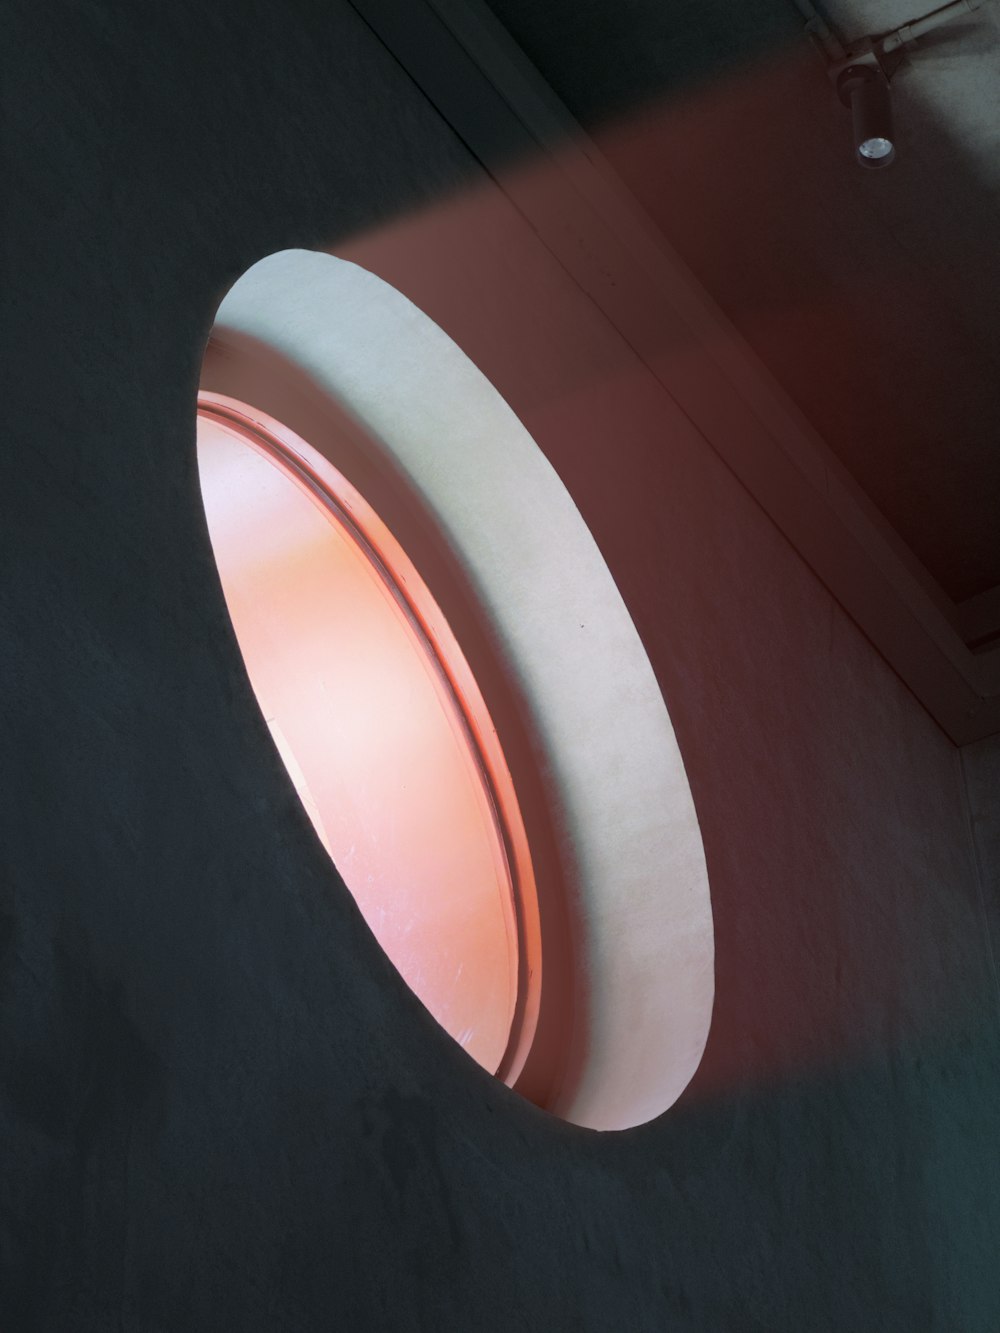 a round light that is on the side of a wall